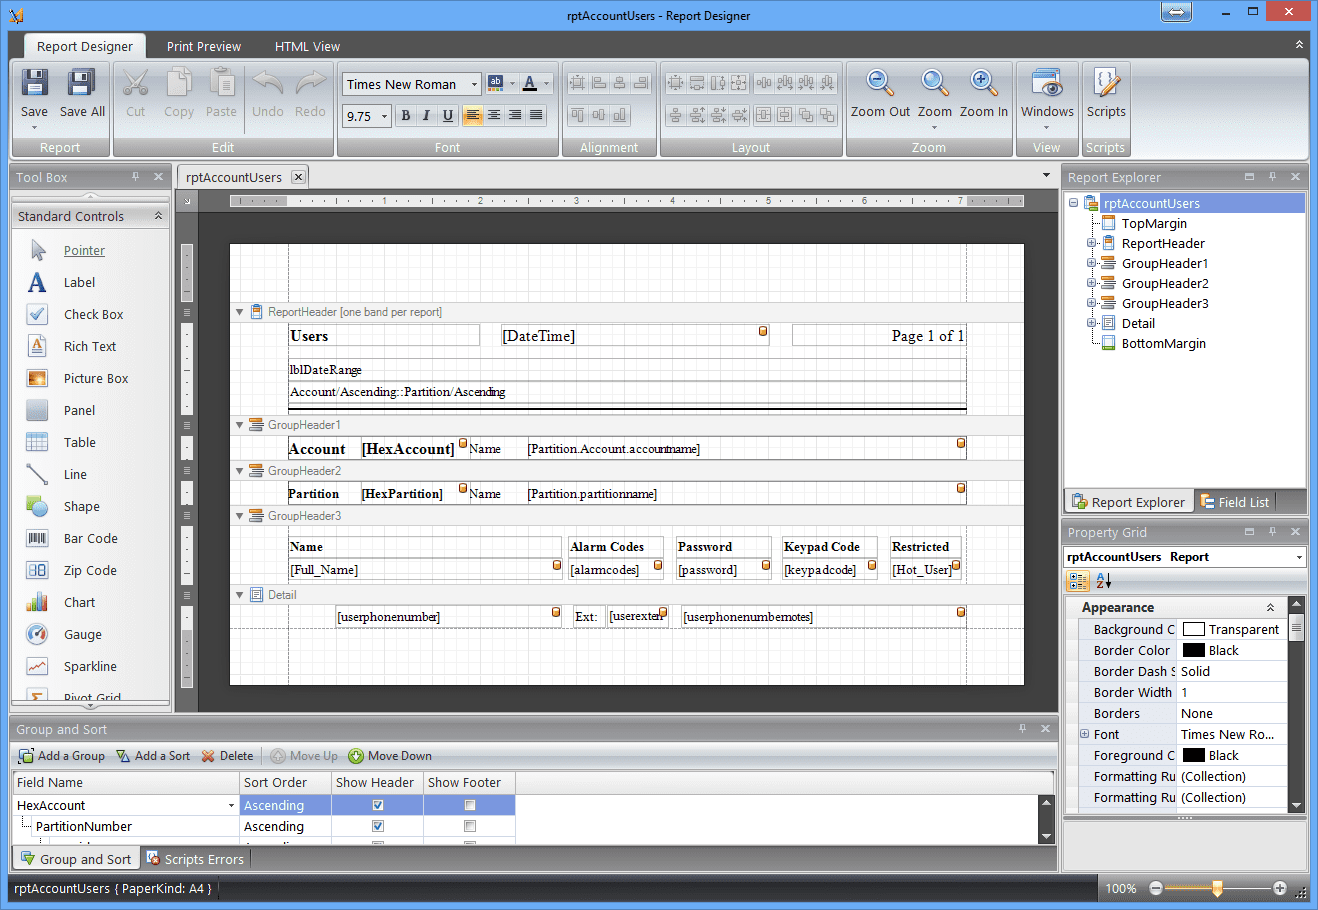 Make your own report with Layout Designer